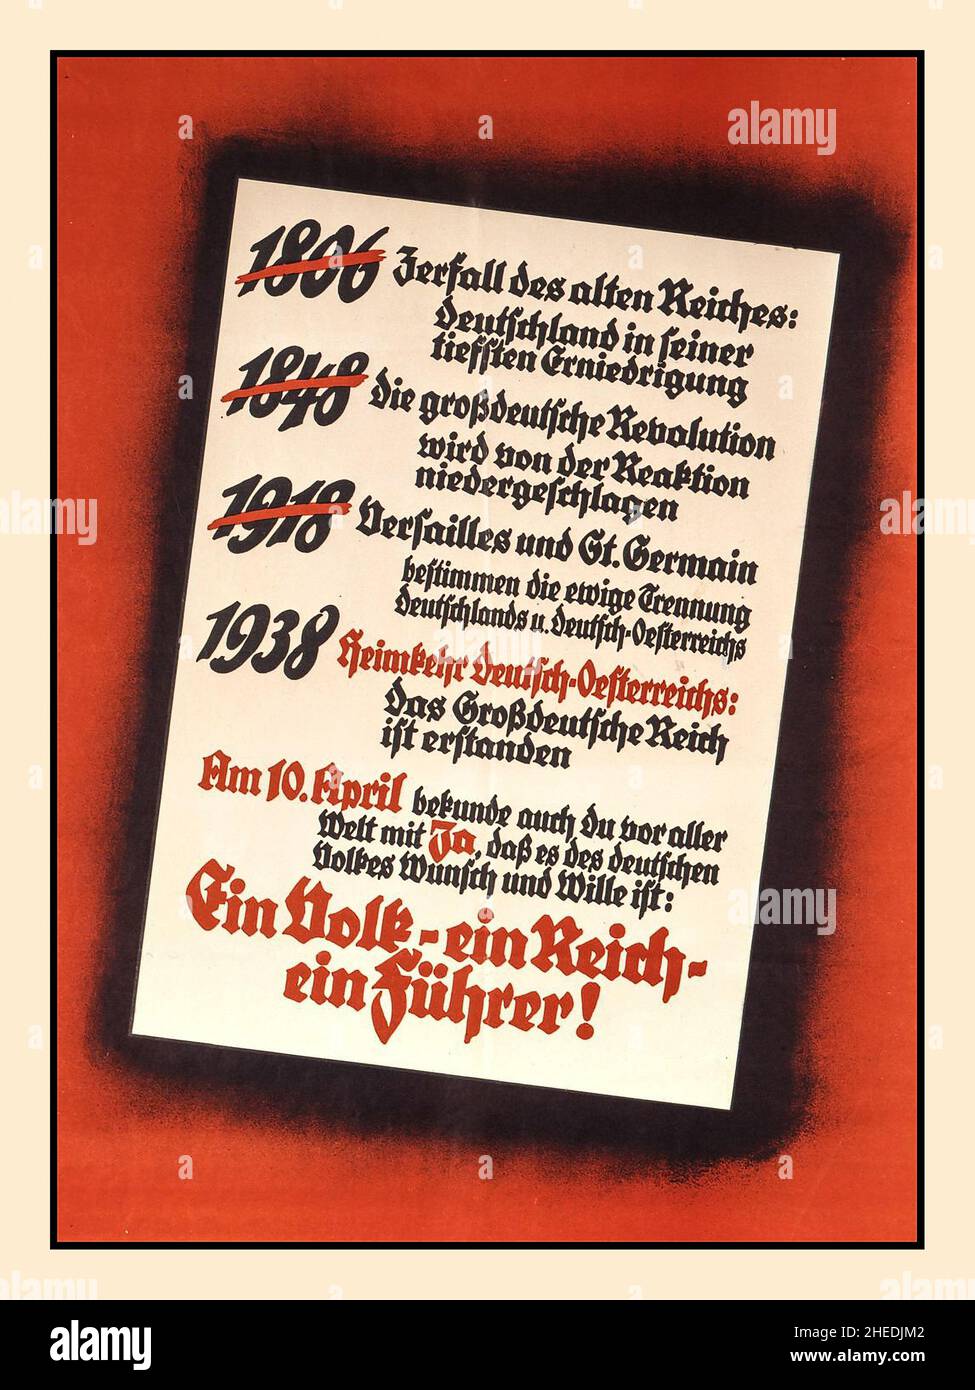 Ein Volk Ein Reich Ein Fuhrer 1938 German propaganda poster: Since 1933 the National Socialists used the slogan 'Ein Volk / Ein Reich / Ein Führer' to promote national unity and their ideal of the 'Volksgemeinschaft'. After Austria's 'annexation' to the German Reich in 1938, this slogan was increasingly used to transfer the unity of 'Führer', party and population to Austria and to promote the national unity of Germans and Austrians as 'a natural people' with a common history and to propagate the future. Anschluss, German: “Union”, political union of Austria with Germany, Stock Photo